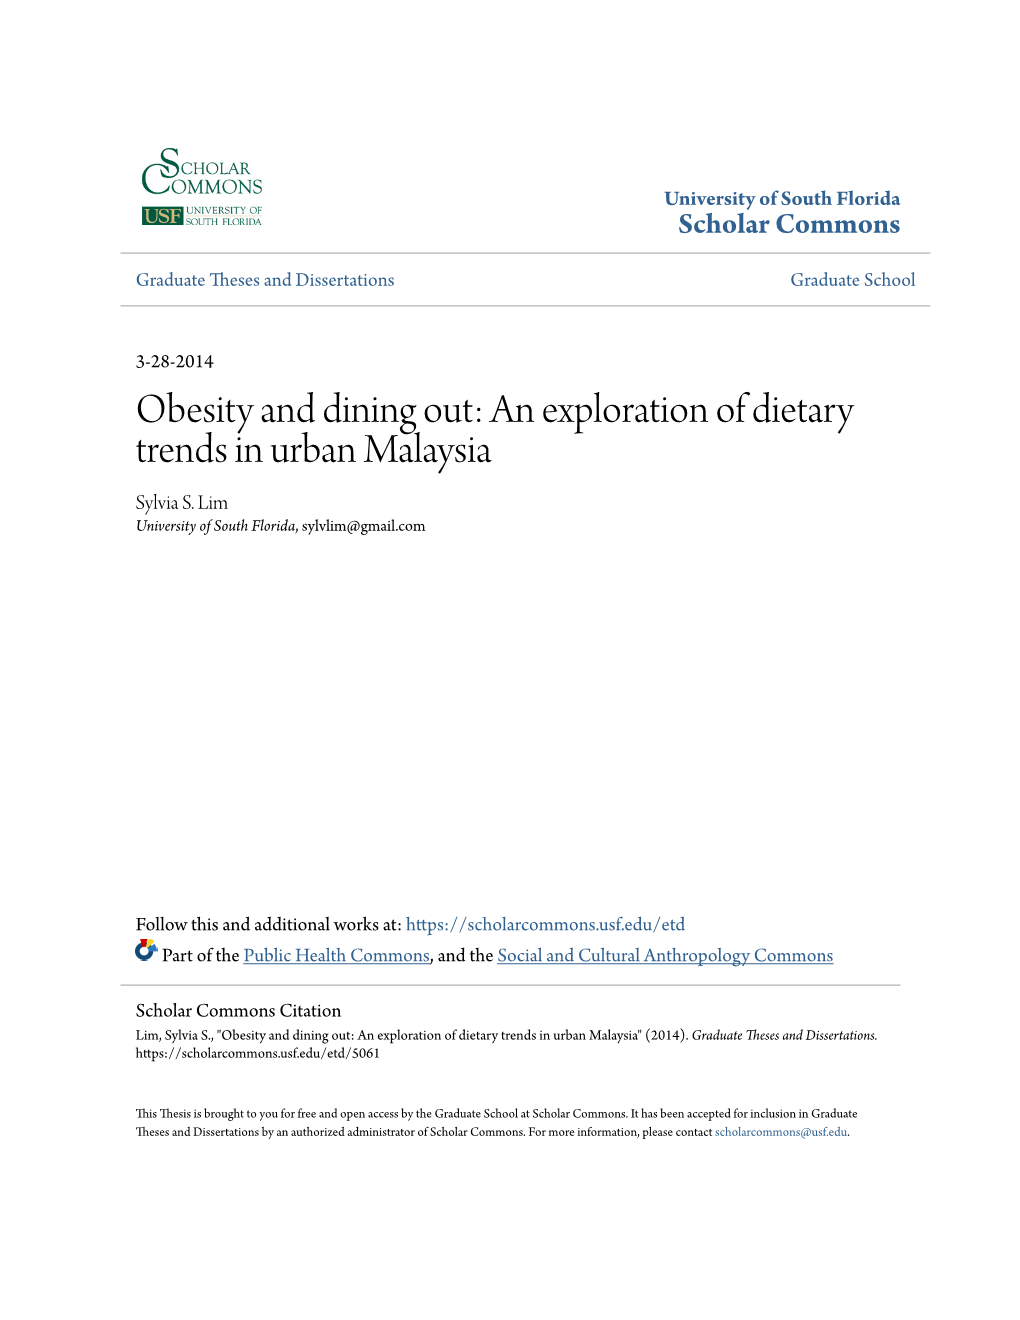 Obesity and Dining Out: an Exploration of Dietary Trends in Urban Malaysia Sylvia S